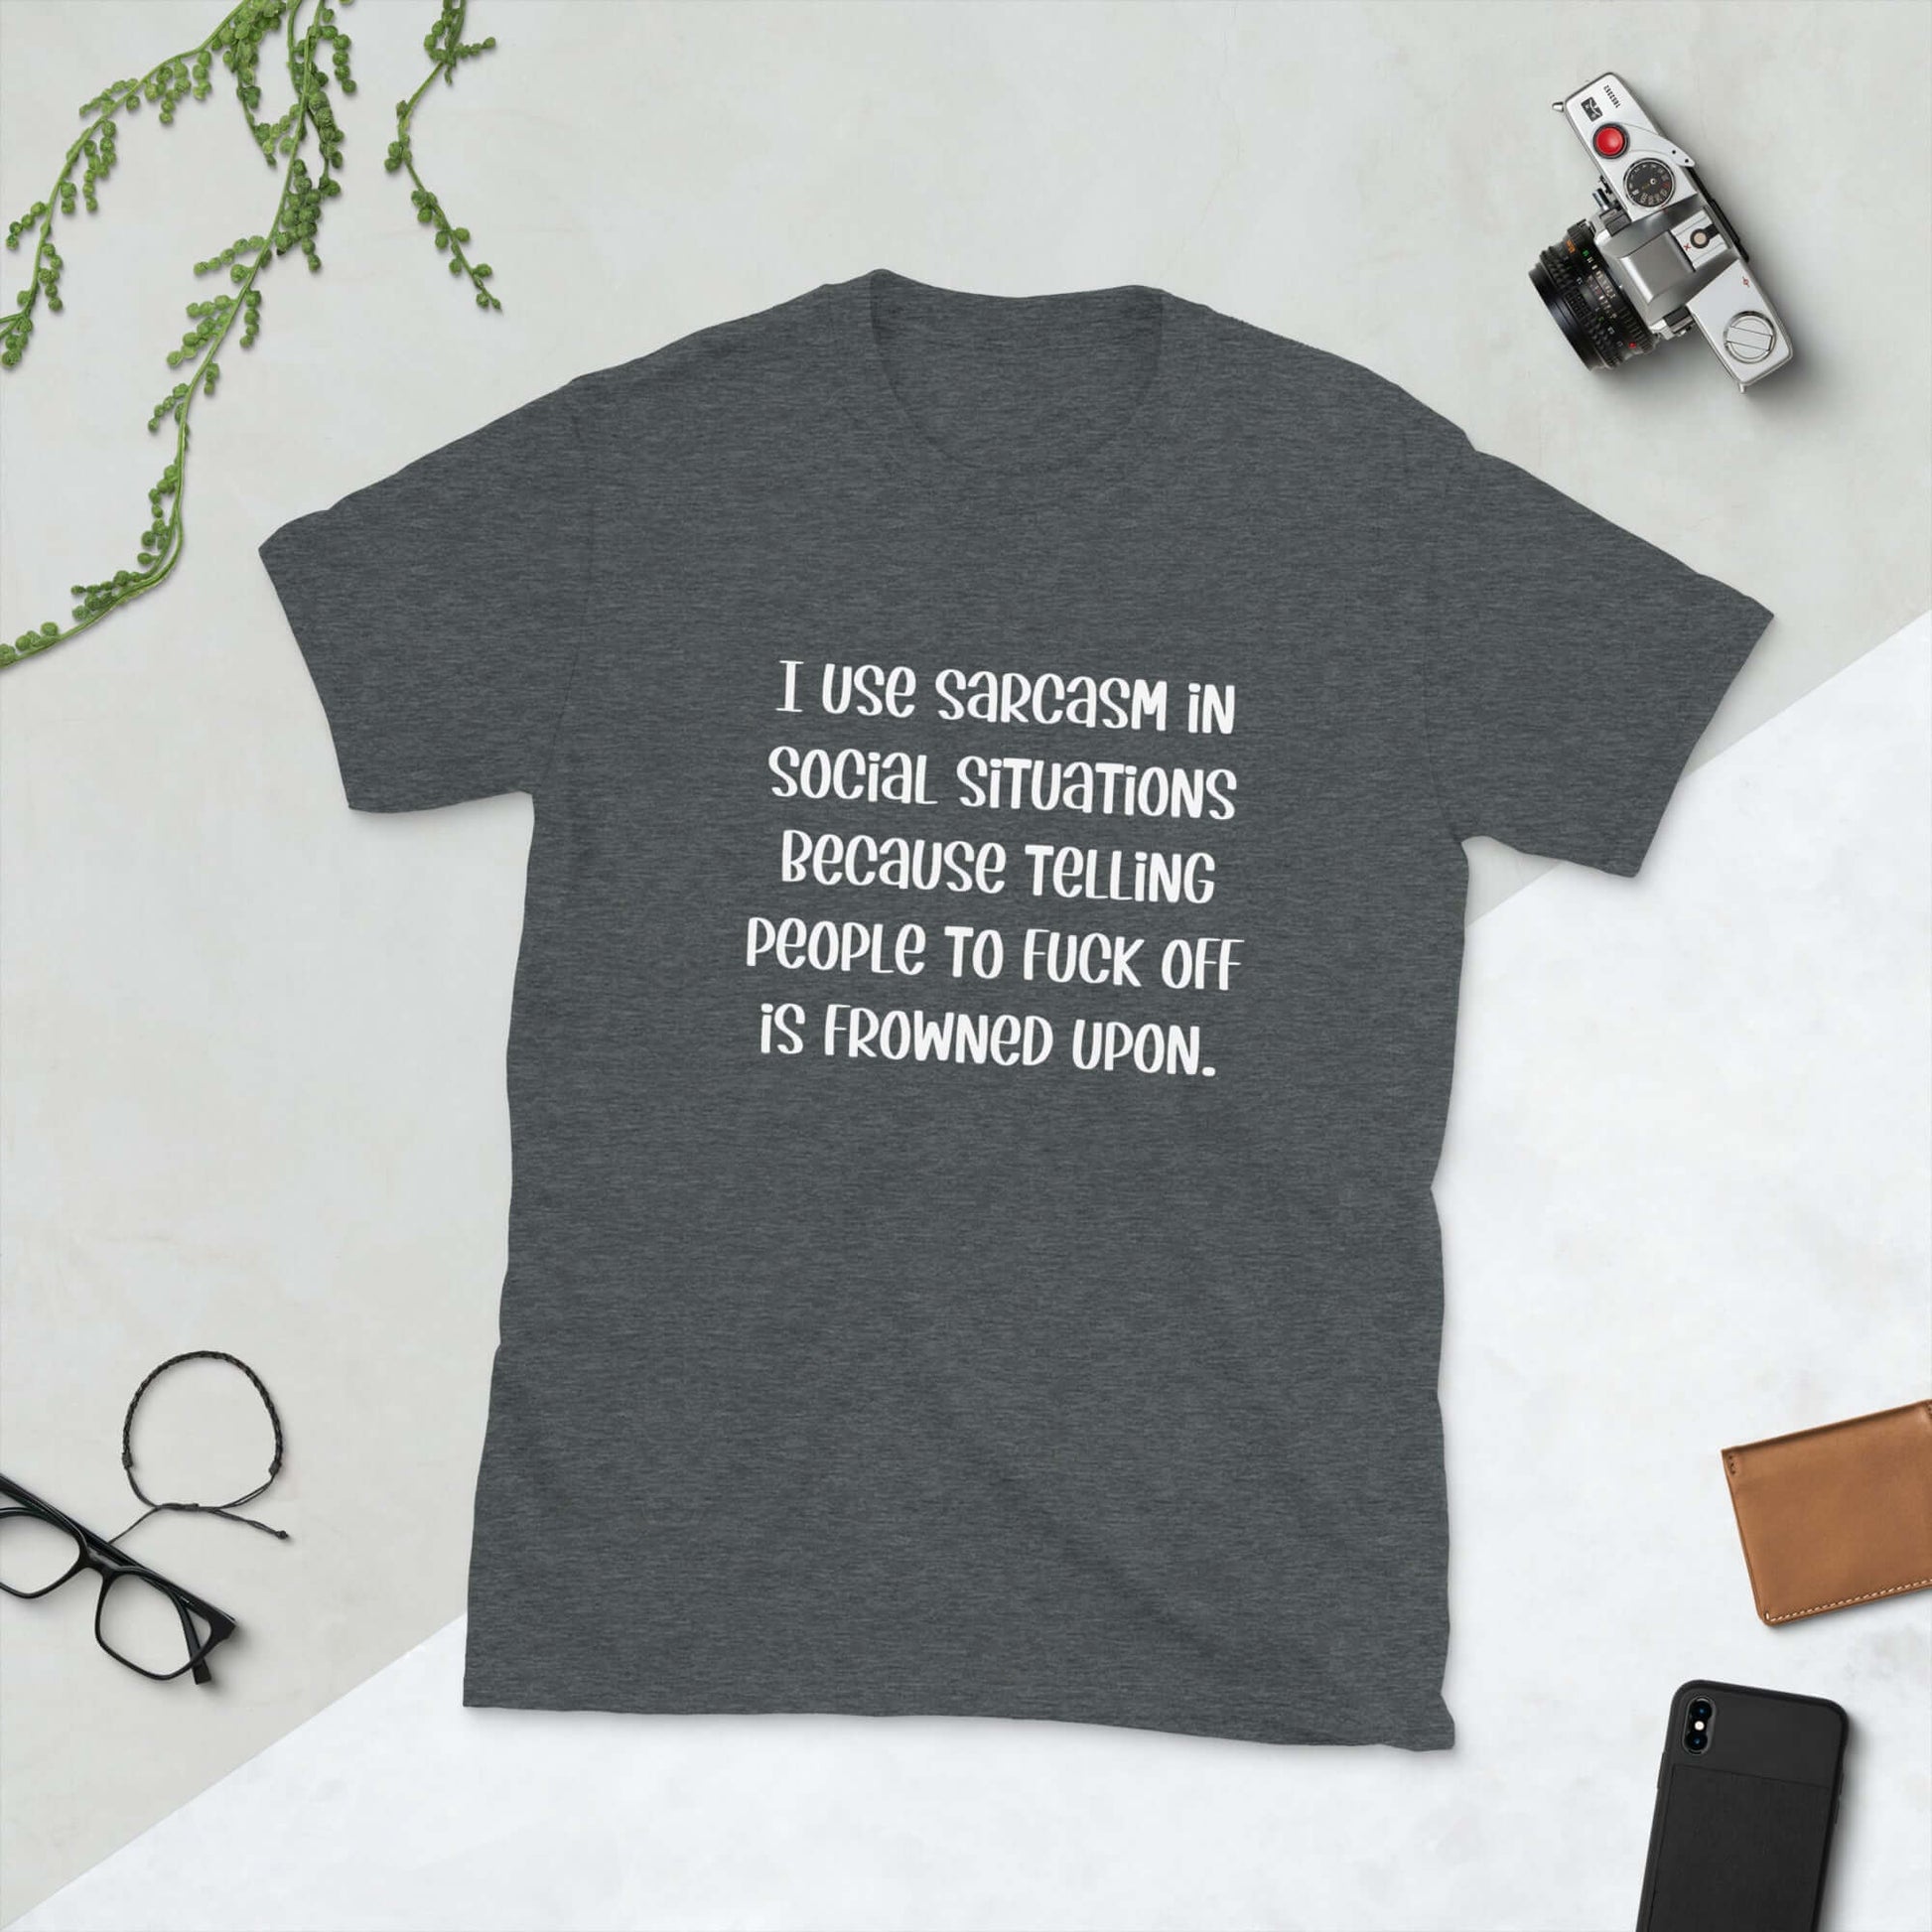 Dark grey t-shirt with the phrase I use sarcasm in social situations because telling people to fuck off is frowned upon printed on the front.